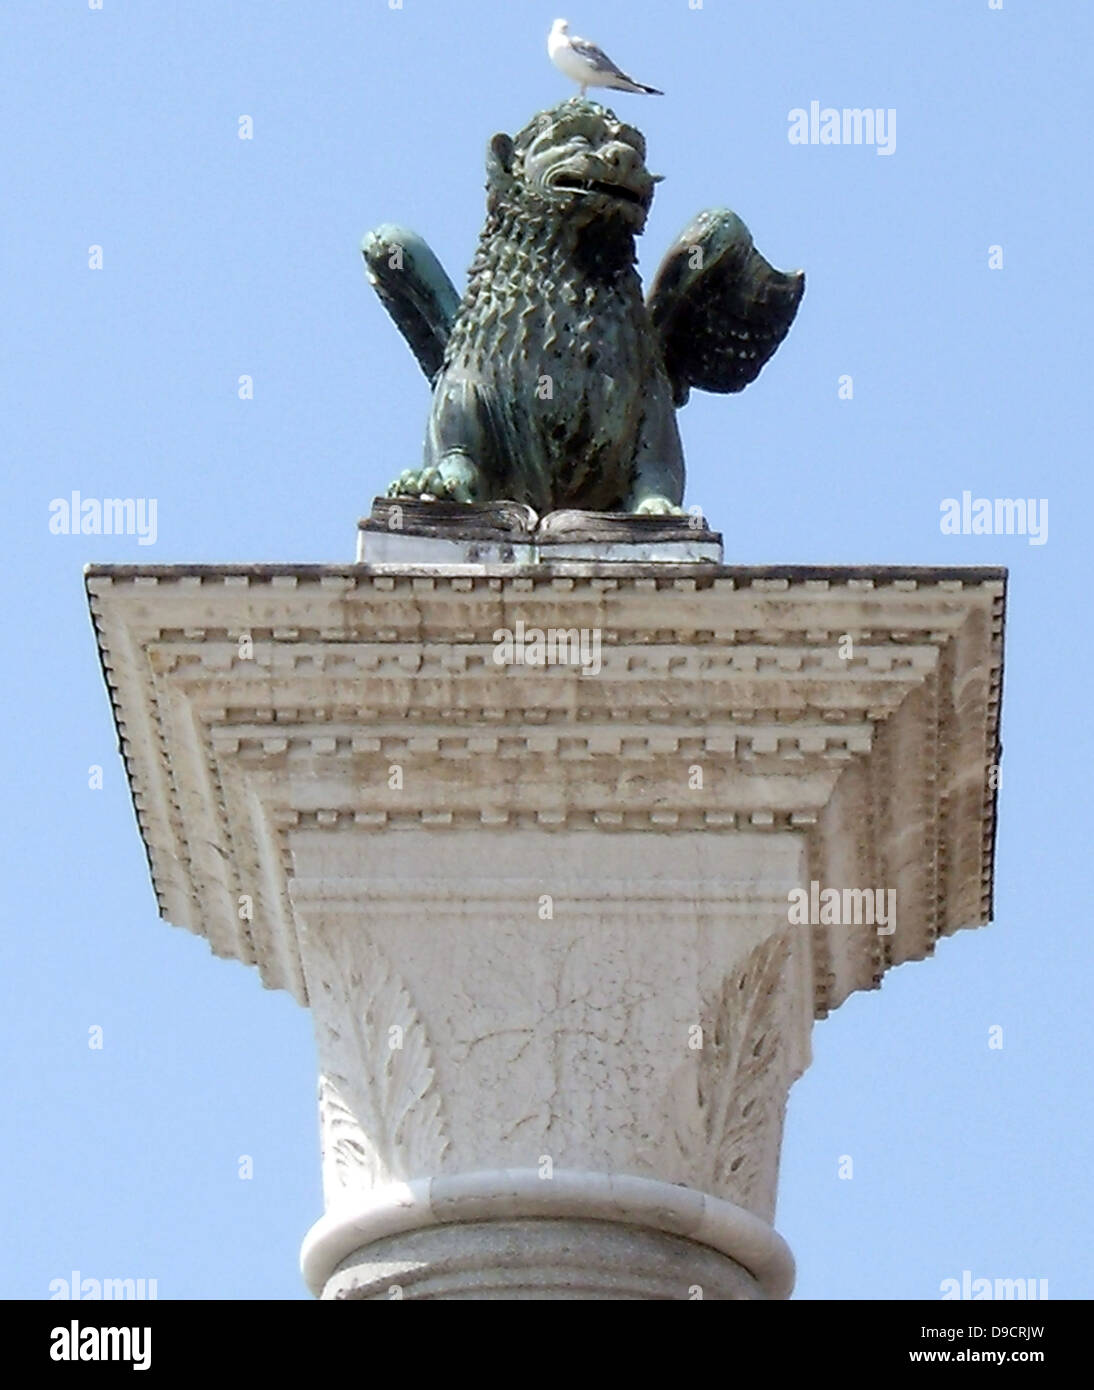 The Piazzetta di San Marco is  an open space connecting the south side of the Piazza to the waterway of the lagoon. The Piazzetta lies between the Doge's Palace on the east and Jacopo Sansovino's Libreria which holds the Biblioteca Marciana on the west. The column has a creature representing the winged lion which is the symbol of St Mark. This has a long history, probably starting as a winged lion-griffin on a monument to the god Sandon at Tarsus in Cilicia (Southern Turkey) about 300 BC. The columns are now thought to have been erected about 1268, Stock Photo